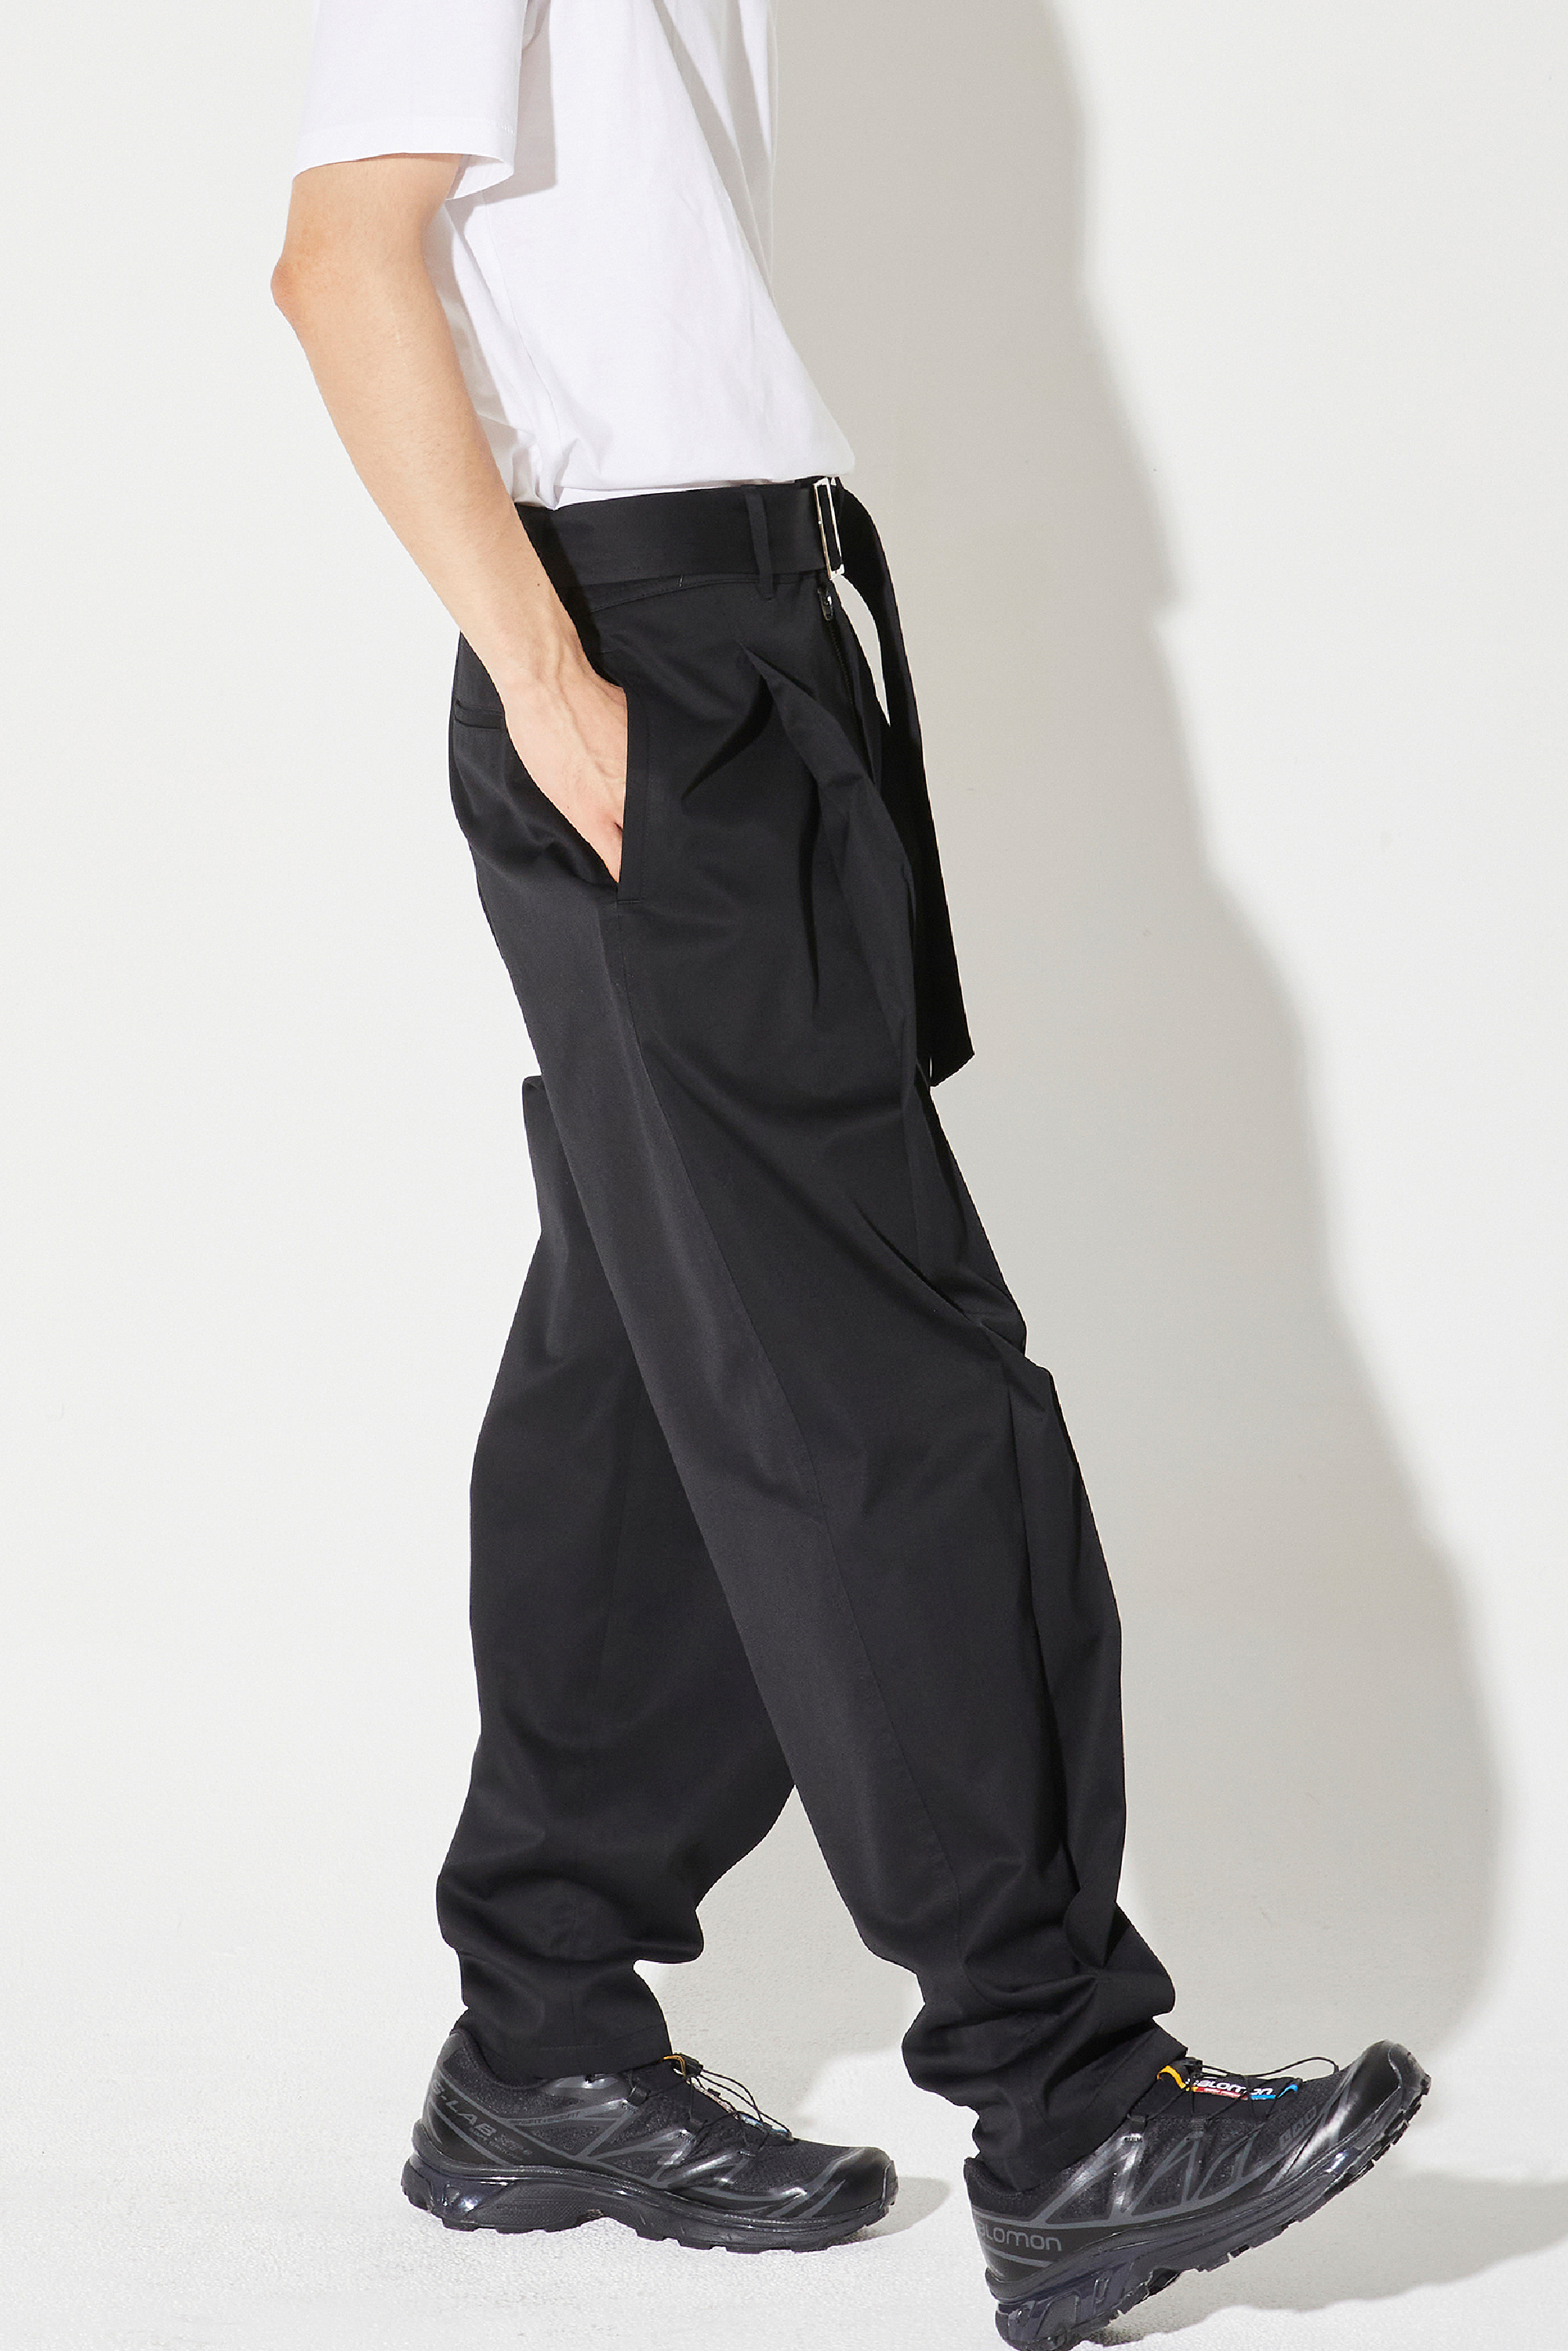 P014 / Structural Tapered Long Pants (Black)